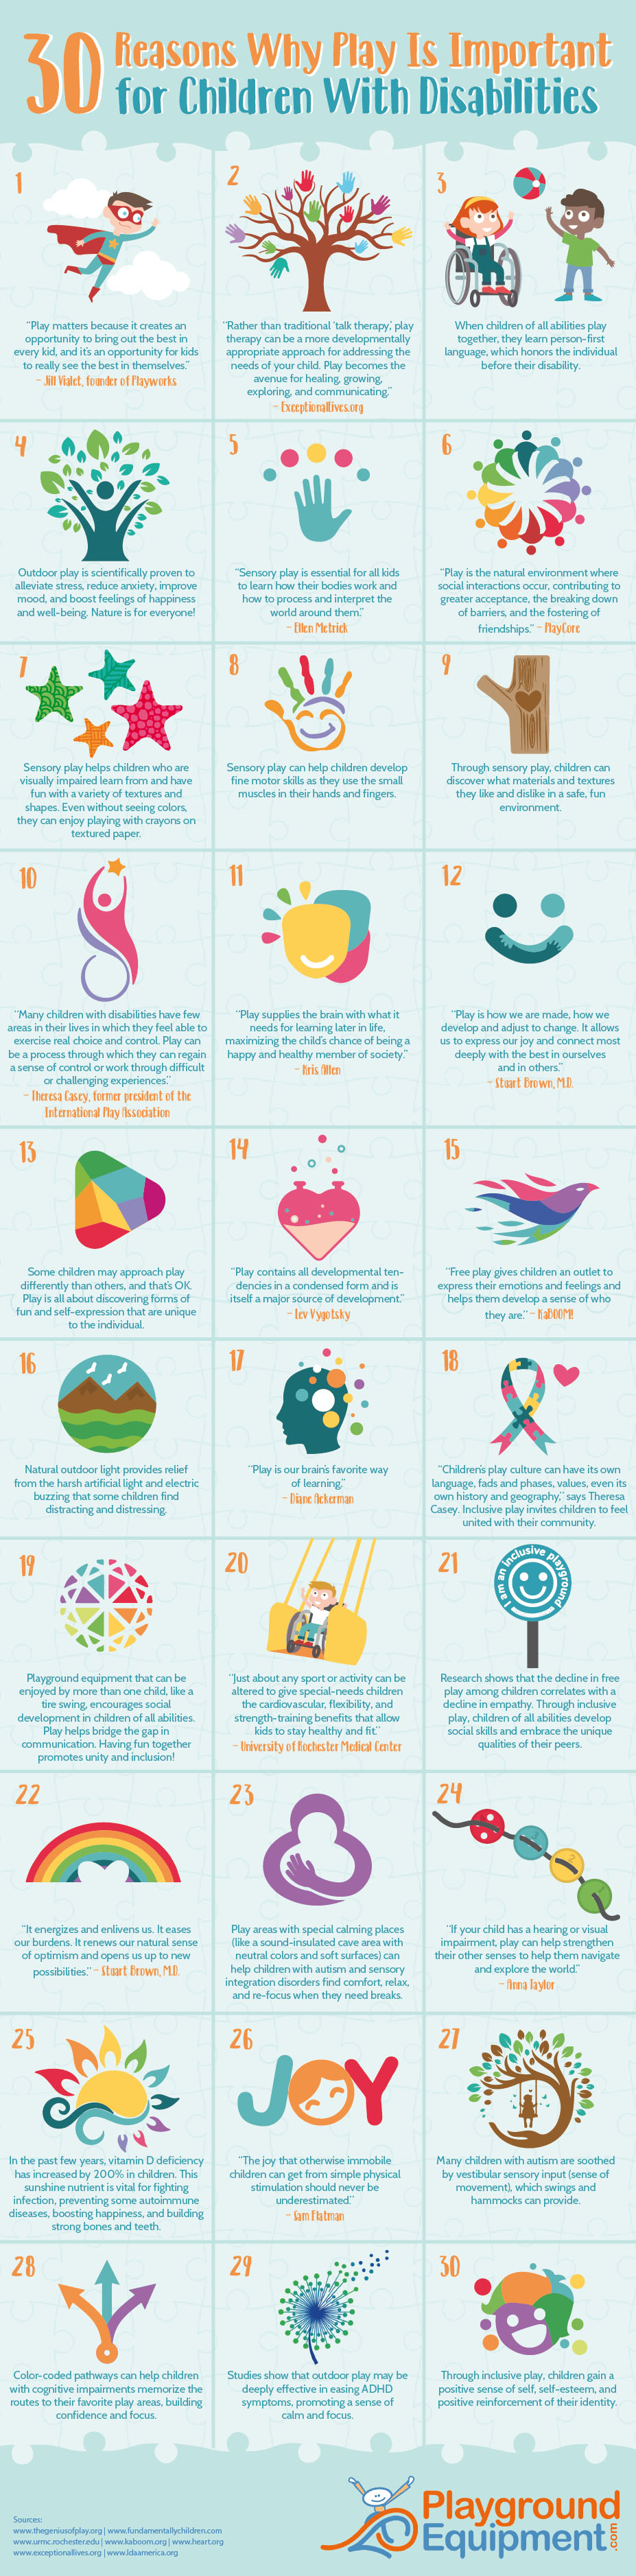 30 Reasons Why Play is Important for Children With Disabilities